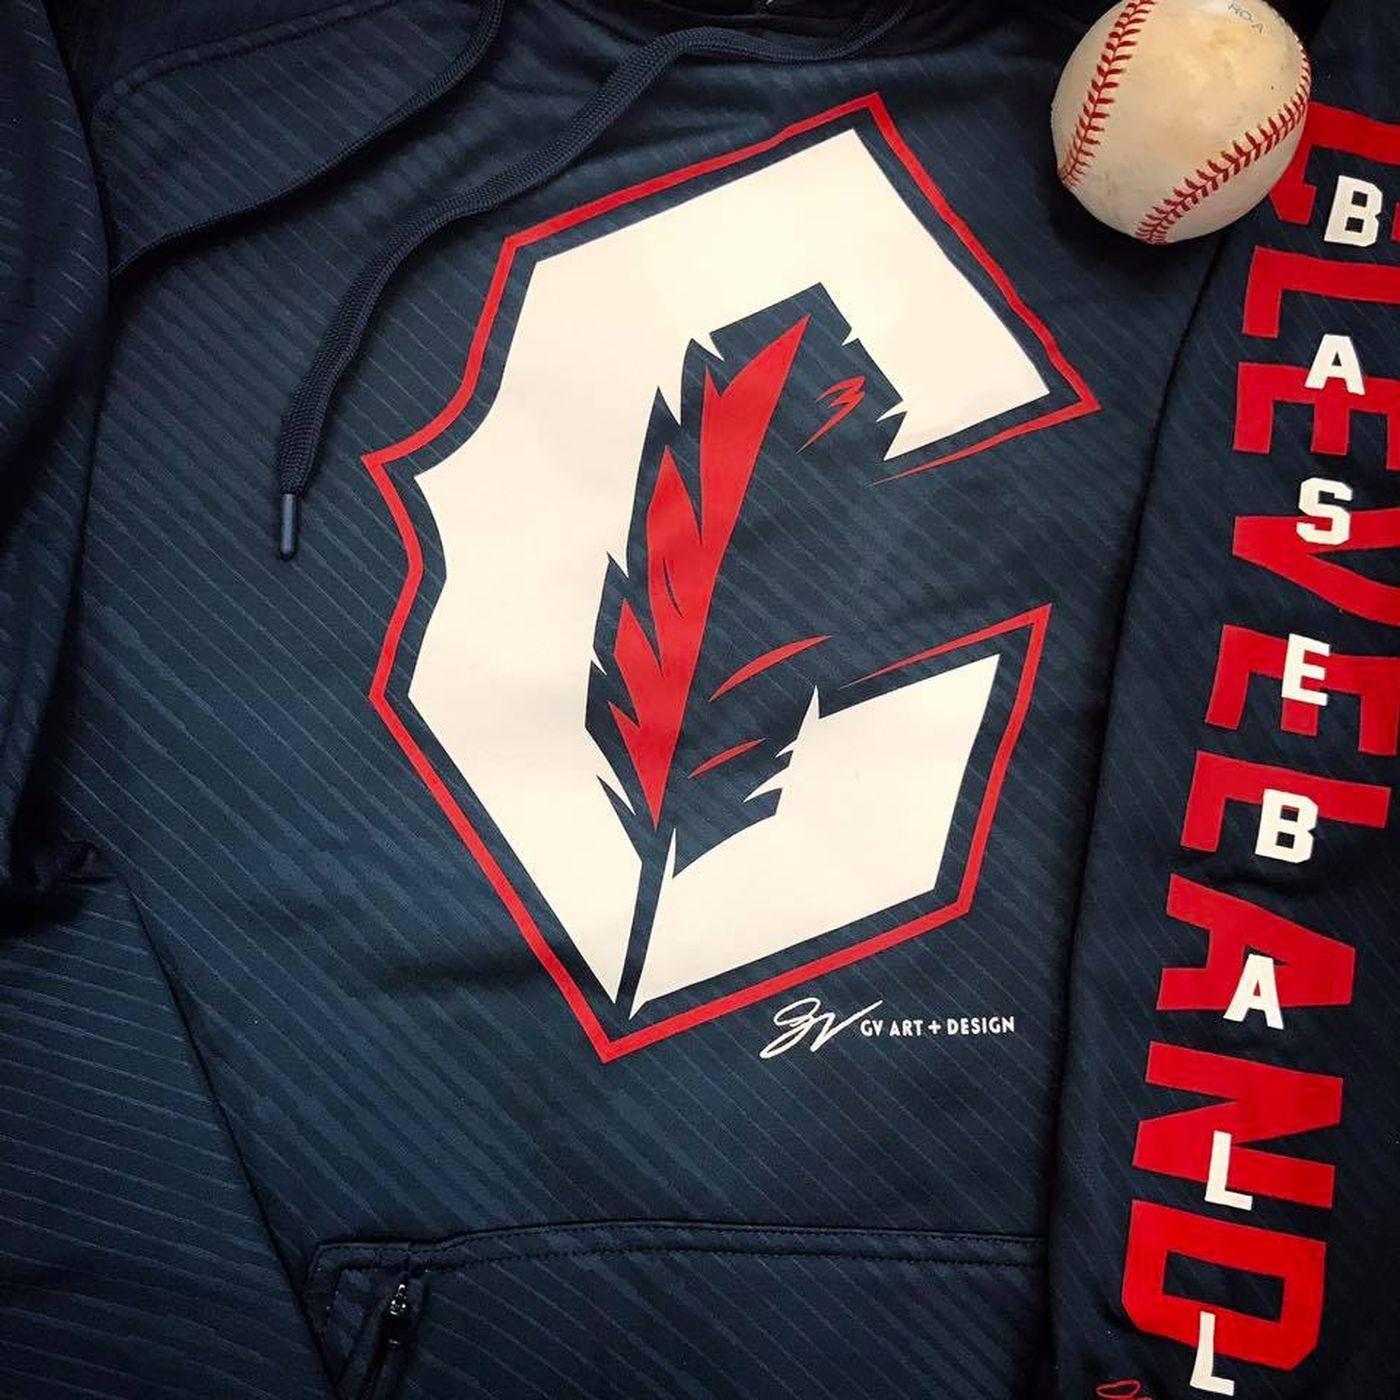 Cleveland Indians Logo - Should this Cleveland Indians logo replace Chief Wahoo?